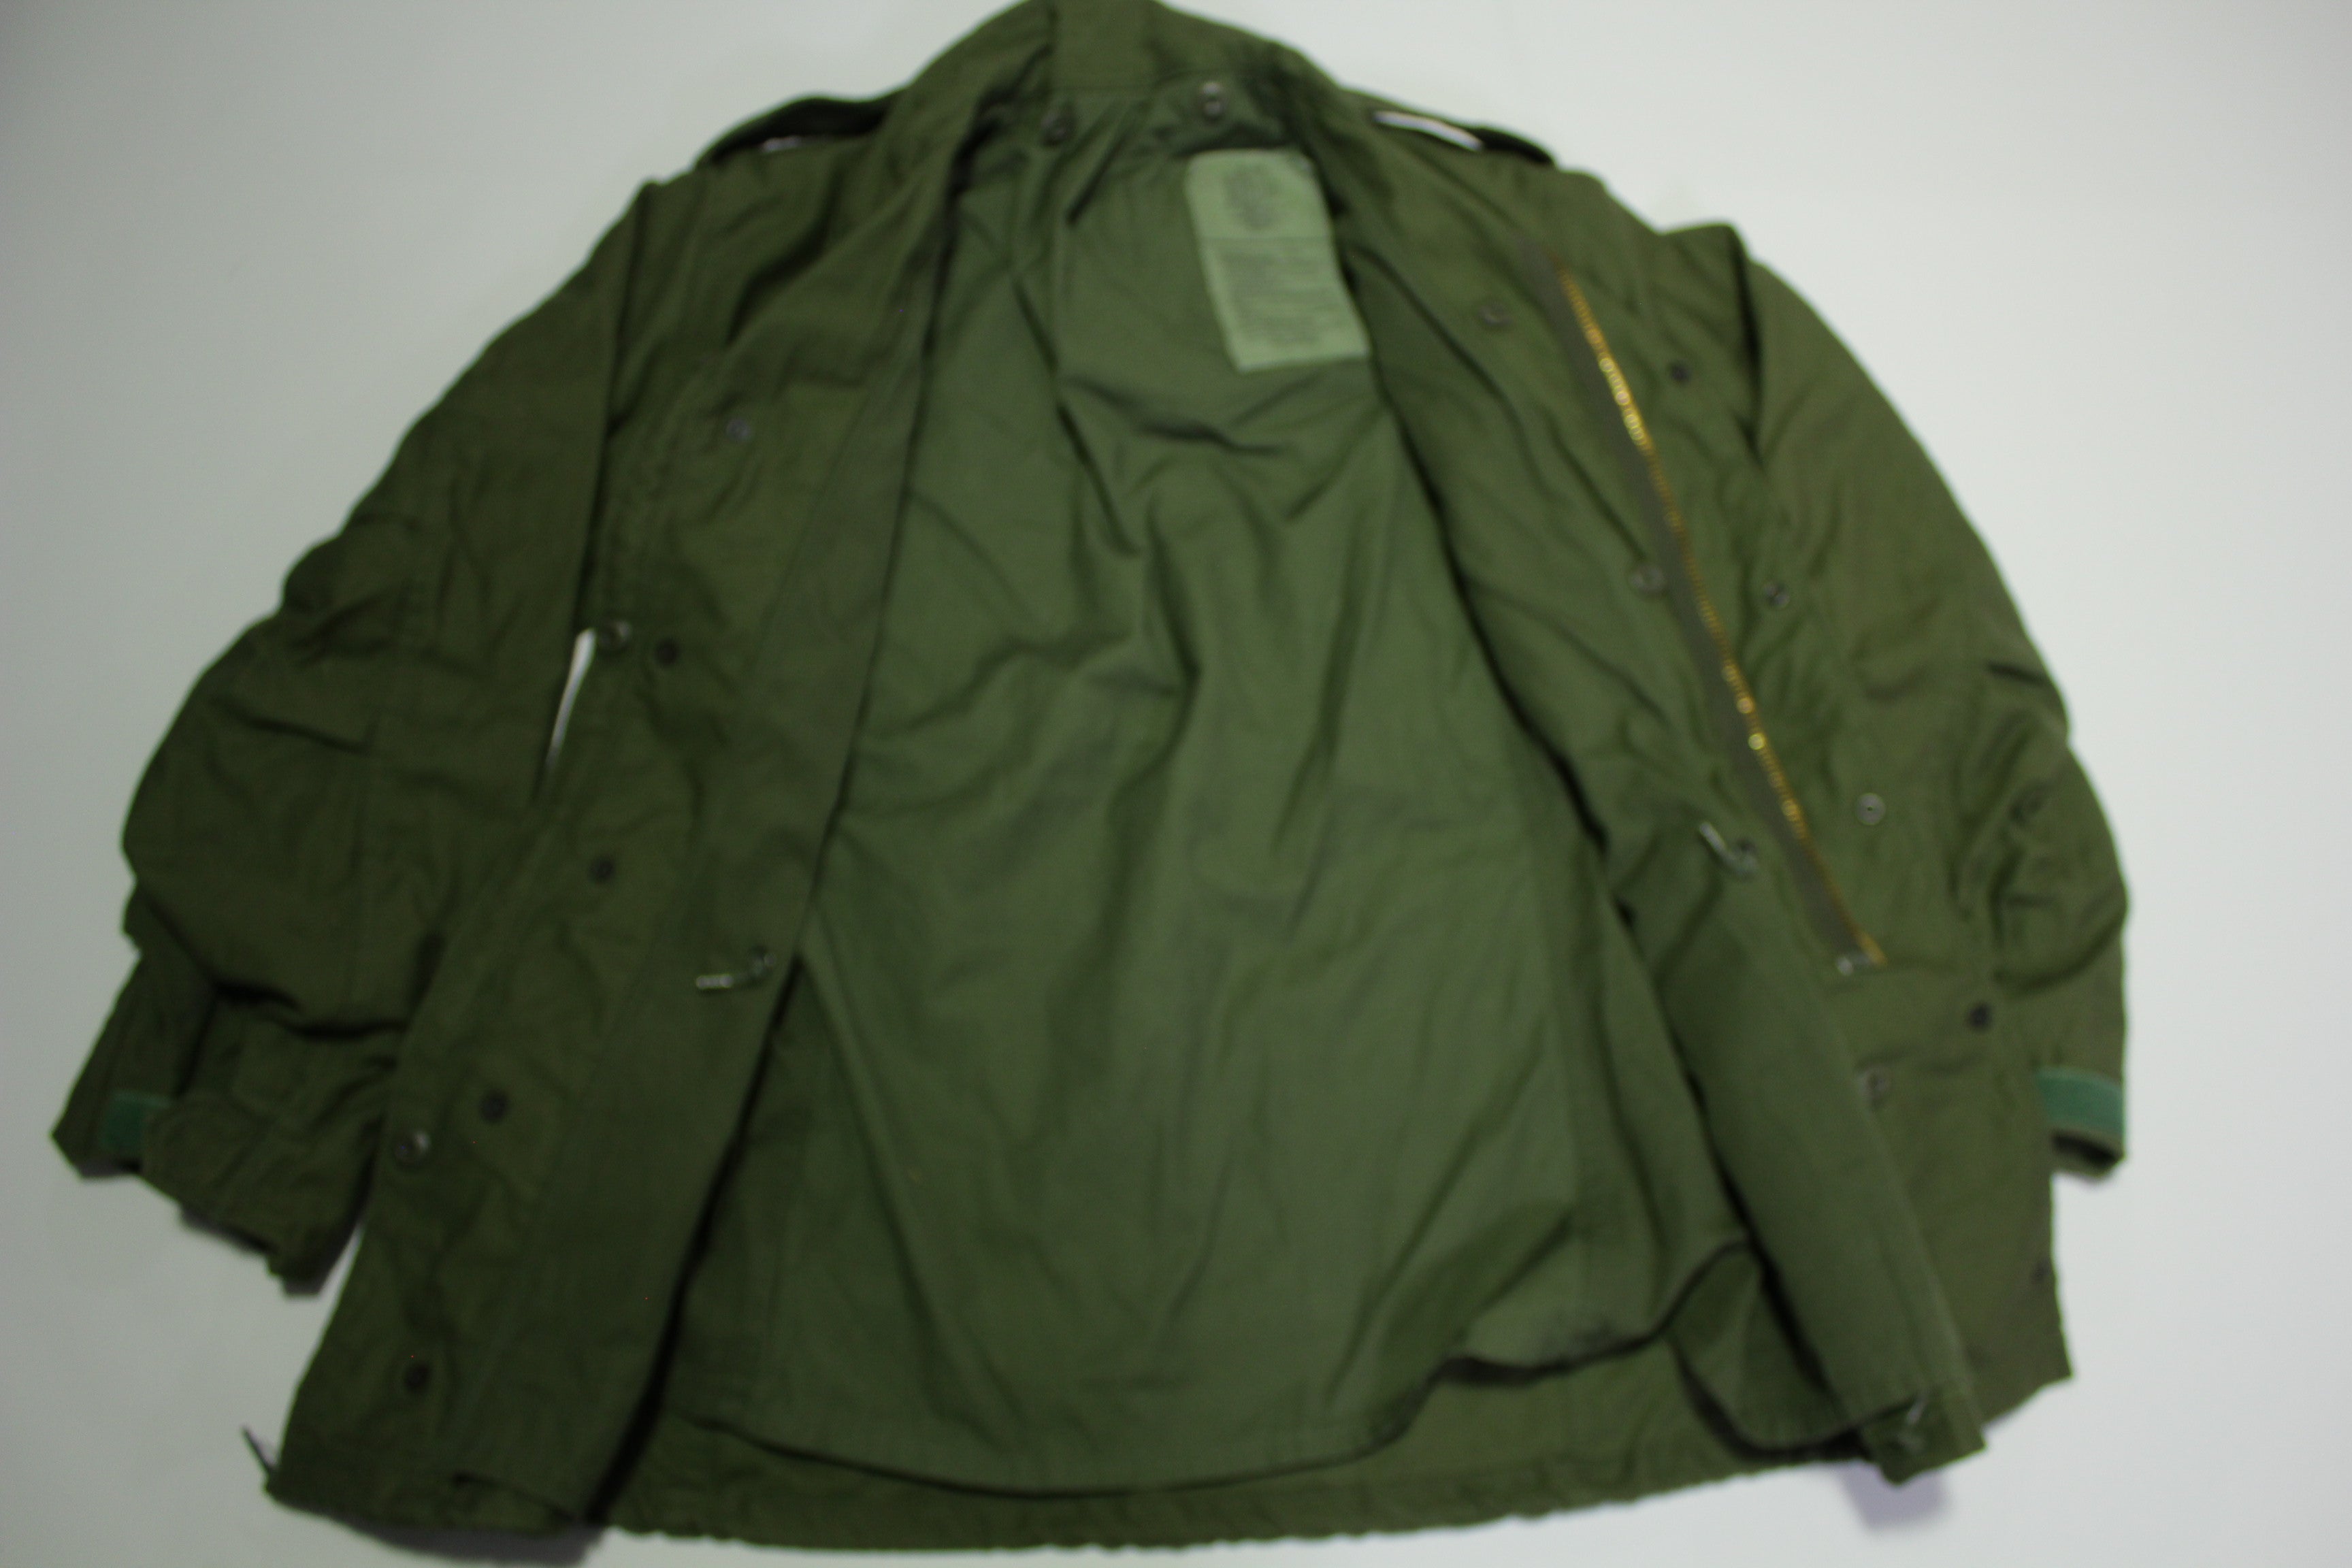 us.navy 80s EXTREME COLD WEATHER JACKET-